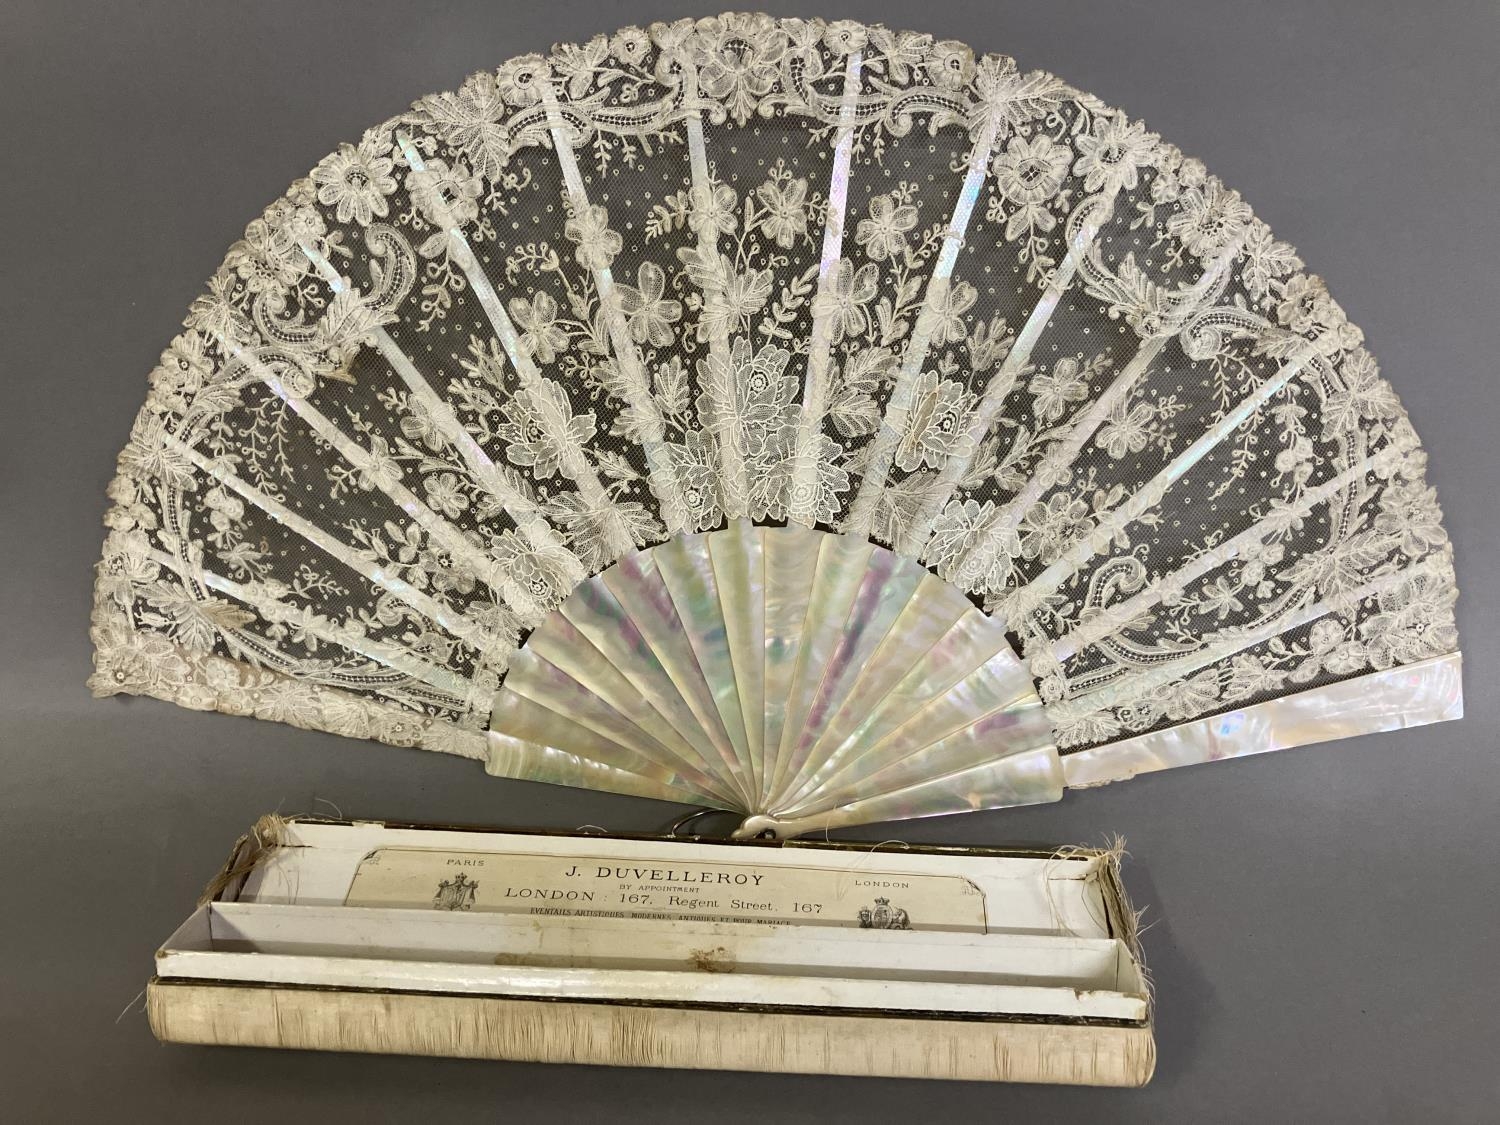 A good Brussels lace fan, mounted on mother of pearl, burgau, including the ribs, the leaf most